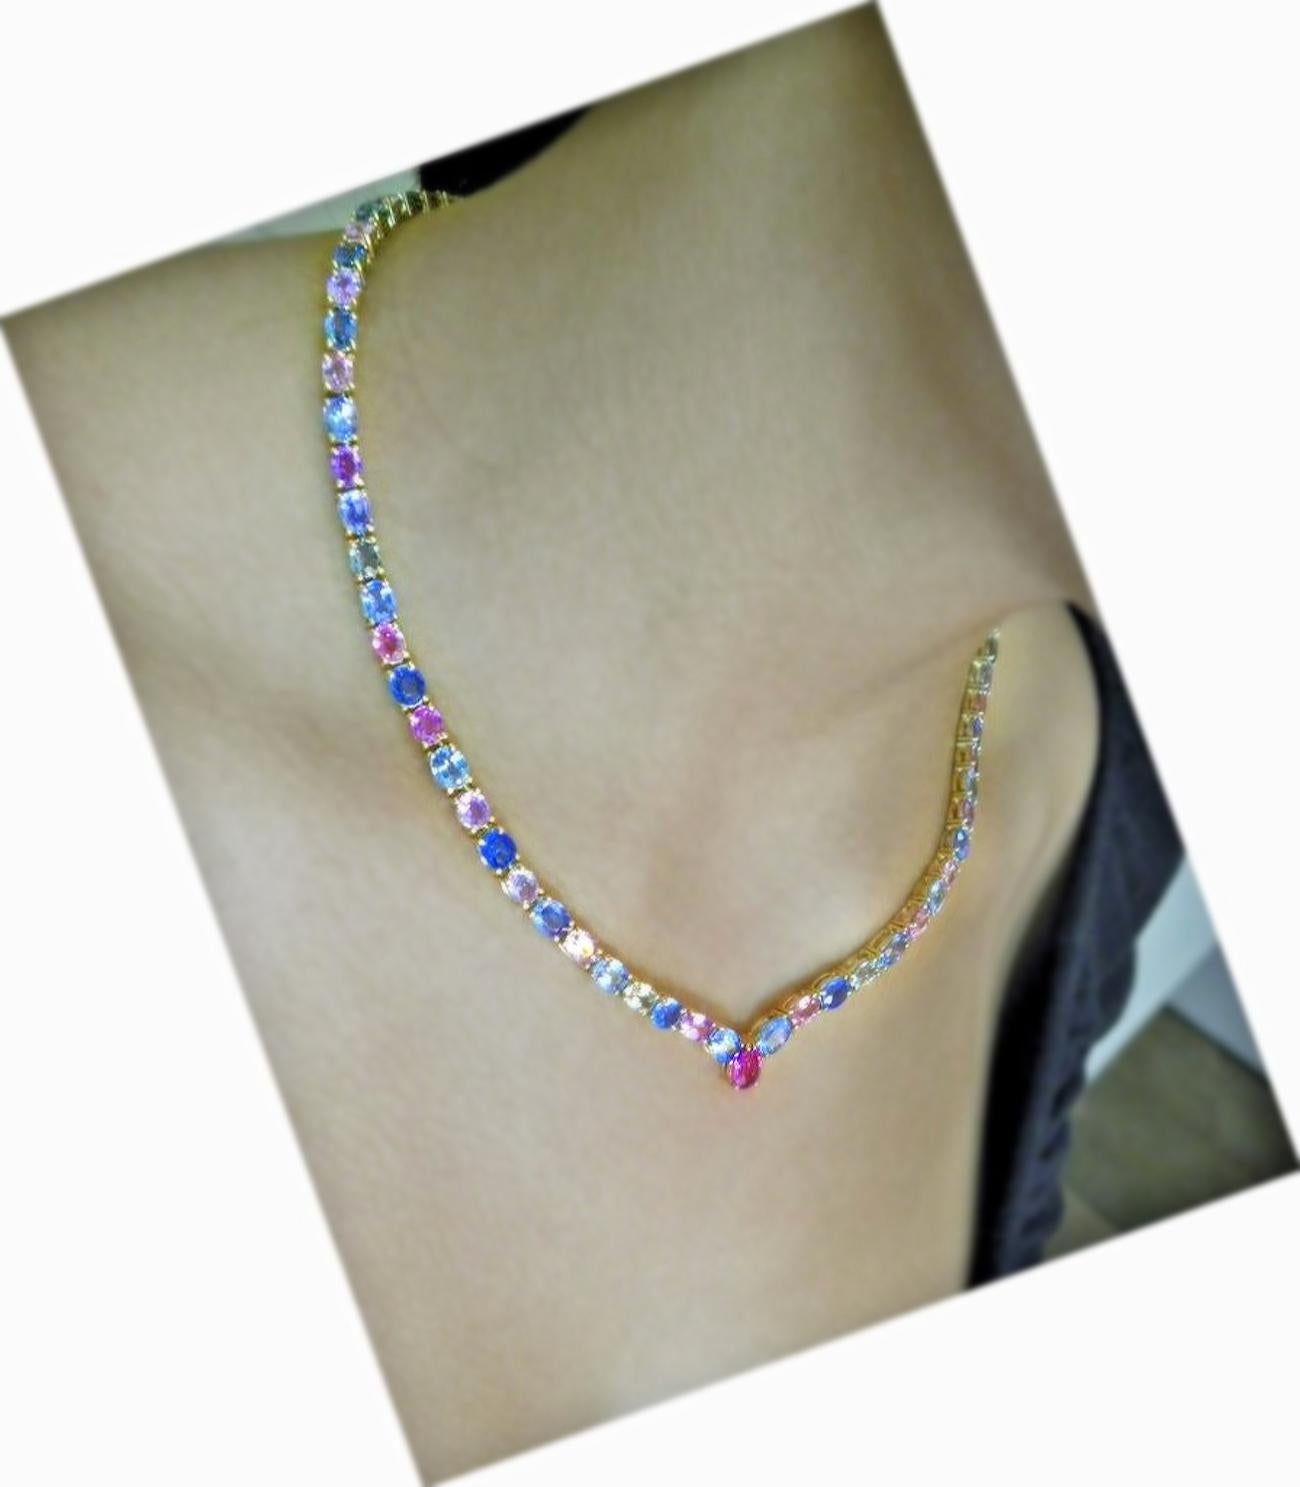 The stunning one-of-a-kind multicolor sapphire necklace features yellow, peach, green, pink, and blue oval cut Burmese natural sapphires   Ranging from medium-light to saturated in hue while weighing in a total of 50.00 carats, 18 karats yellow